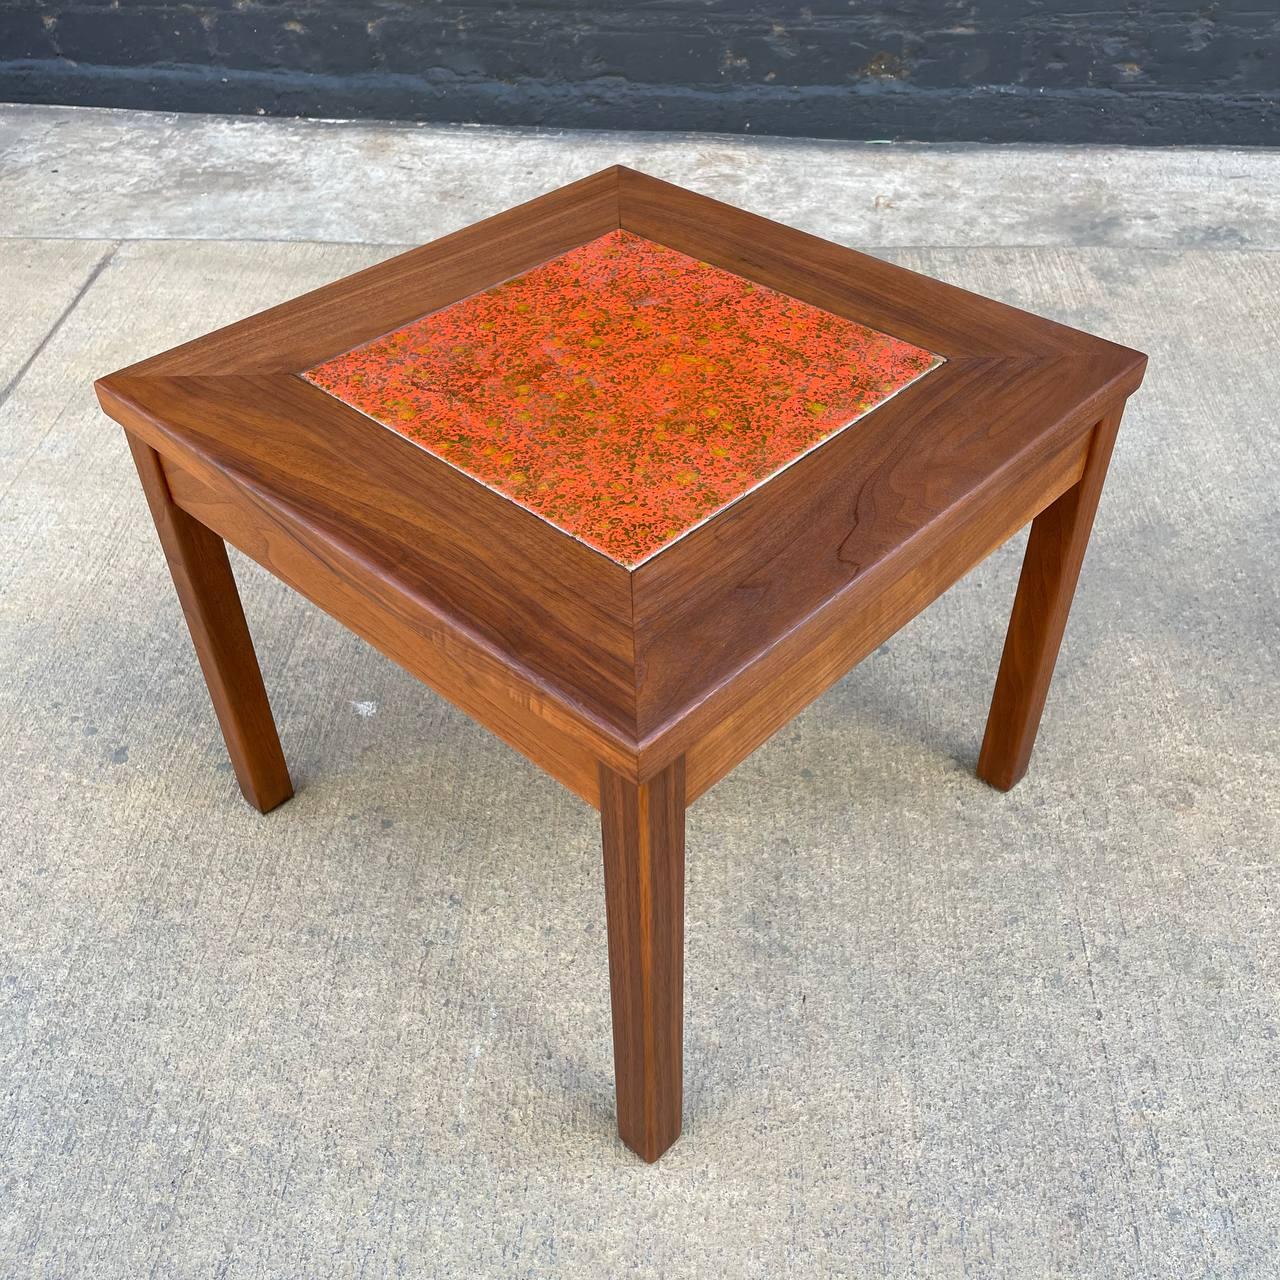 Newly Refinished - Pair of Mid-Century Modern Tile Top Side Tables by John Keal  For Sale 2